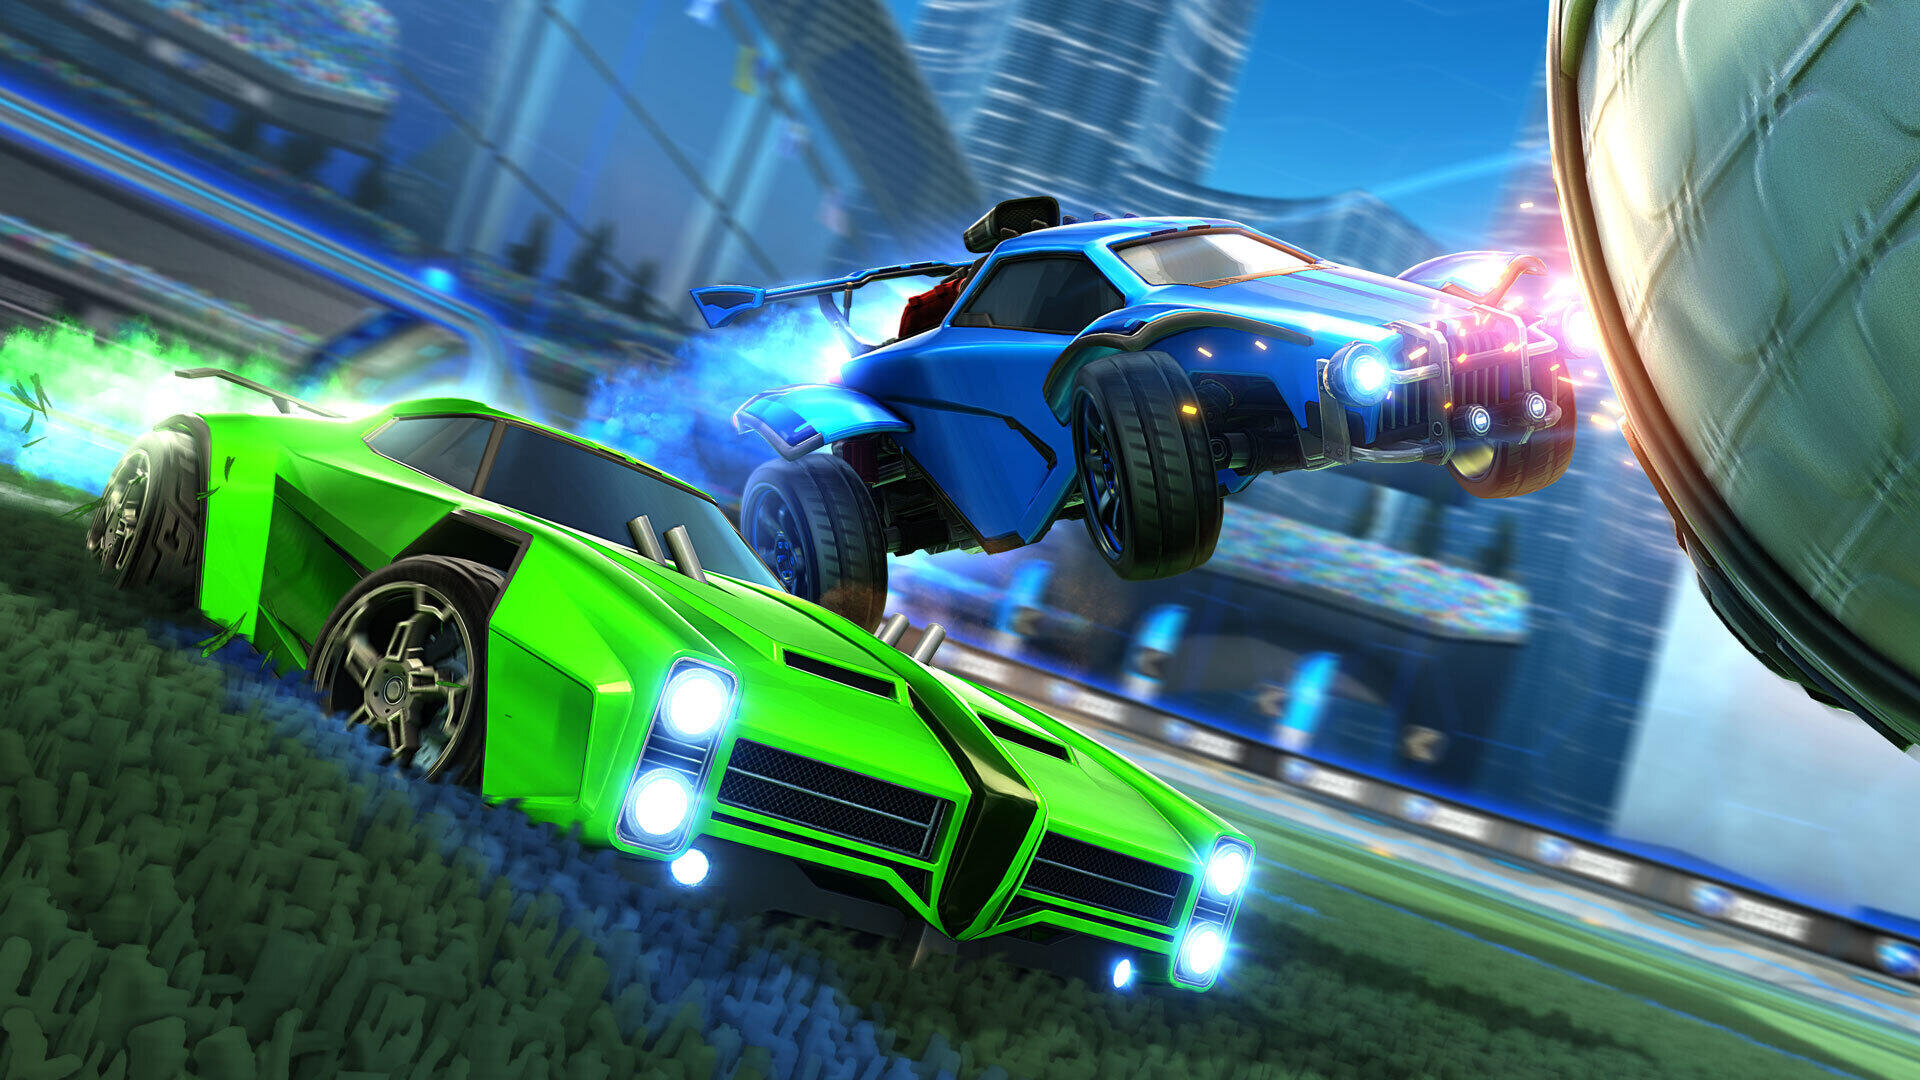 How To Use This Is Rocket League Quick Chat? | TechBriefly